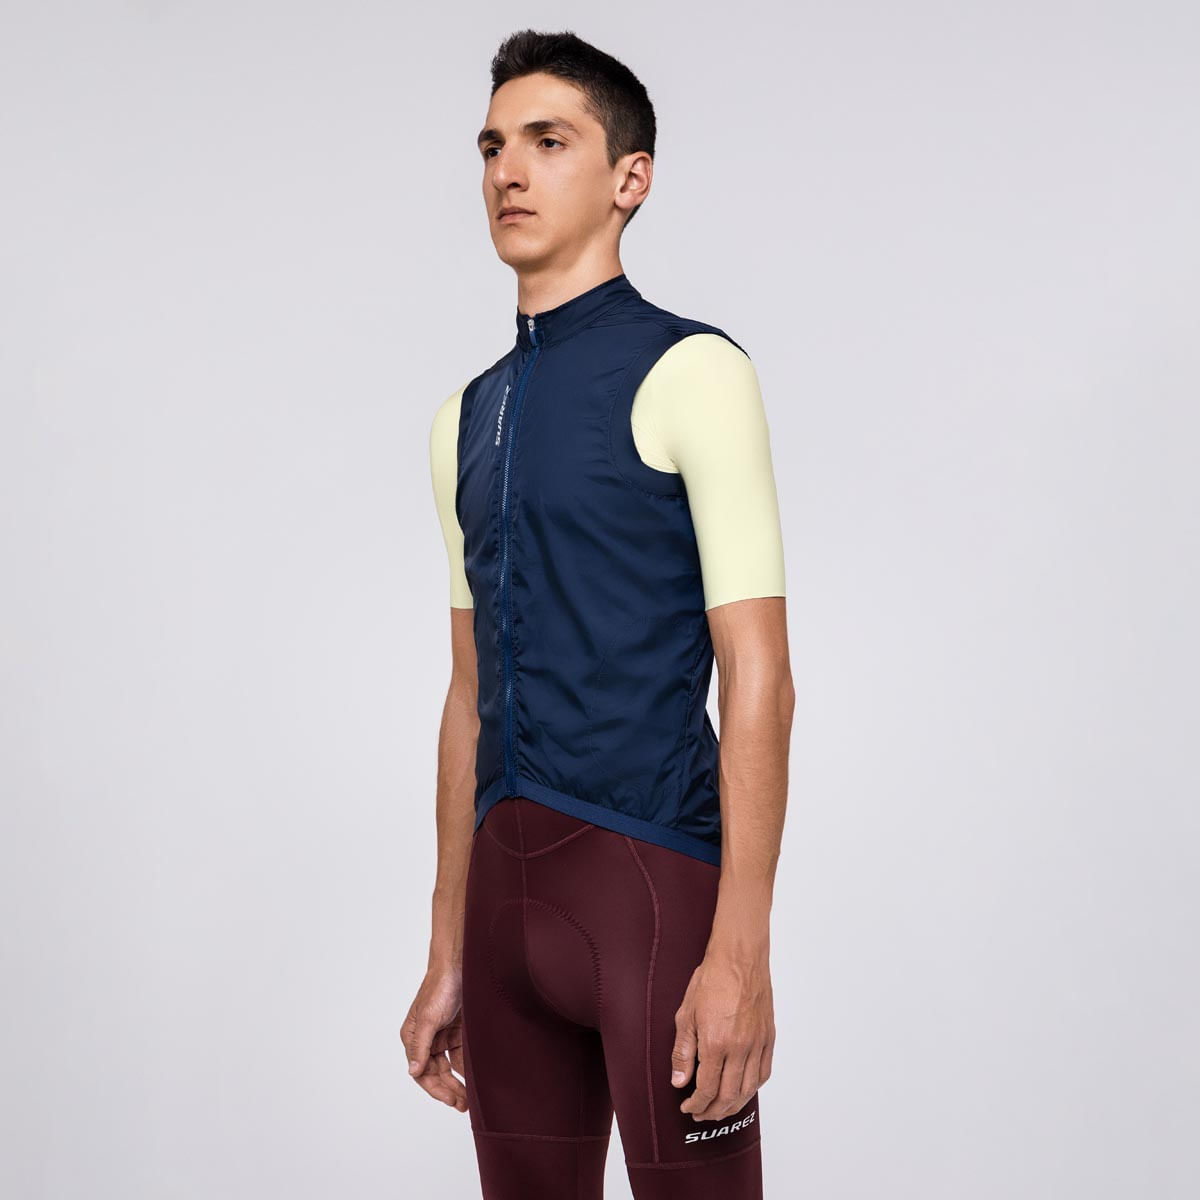 PMCC Cycling Men's Blue Sleeveless Vest Windproof/Waterproof Bicycle Gielt Chaleco  Ciclismo Cortavientos Ciclismo Hombre Winter